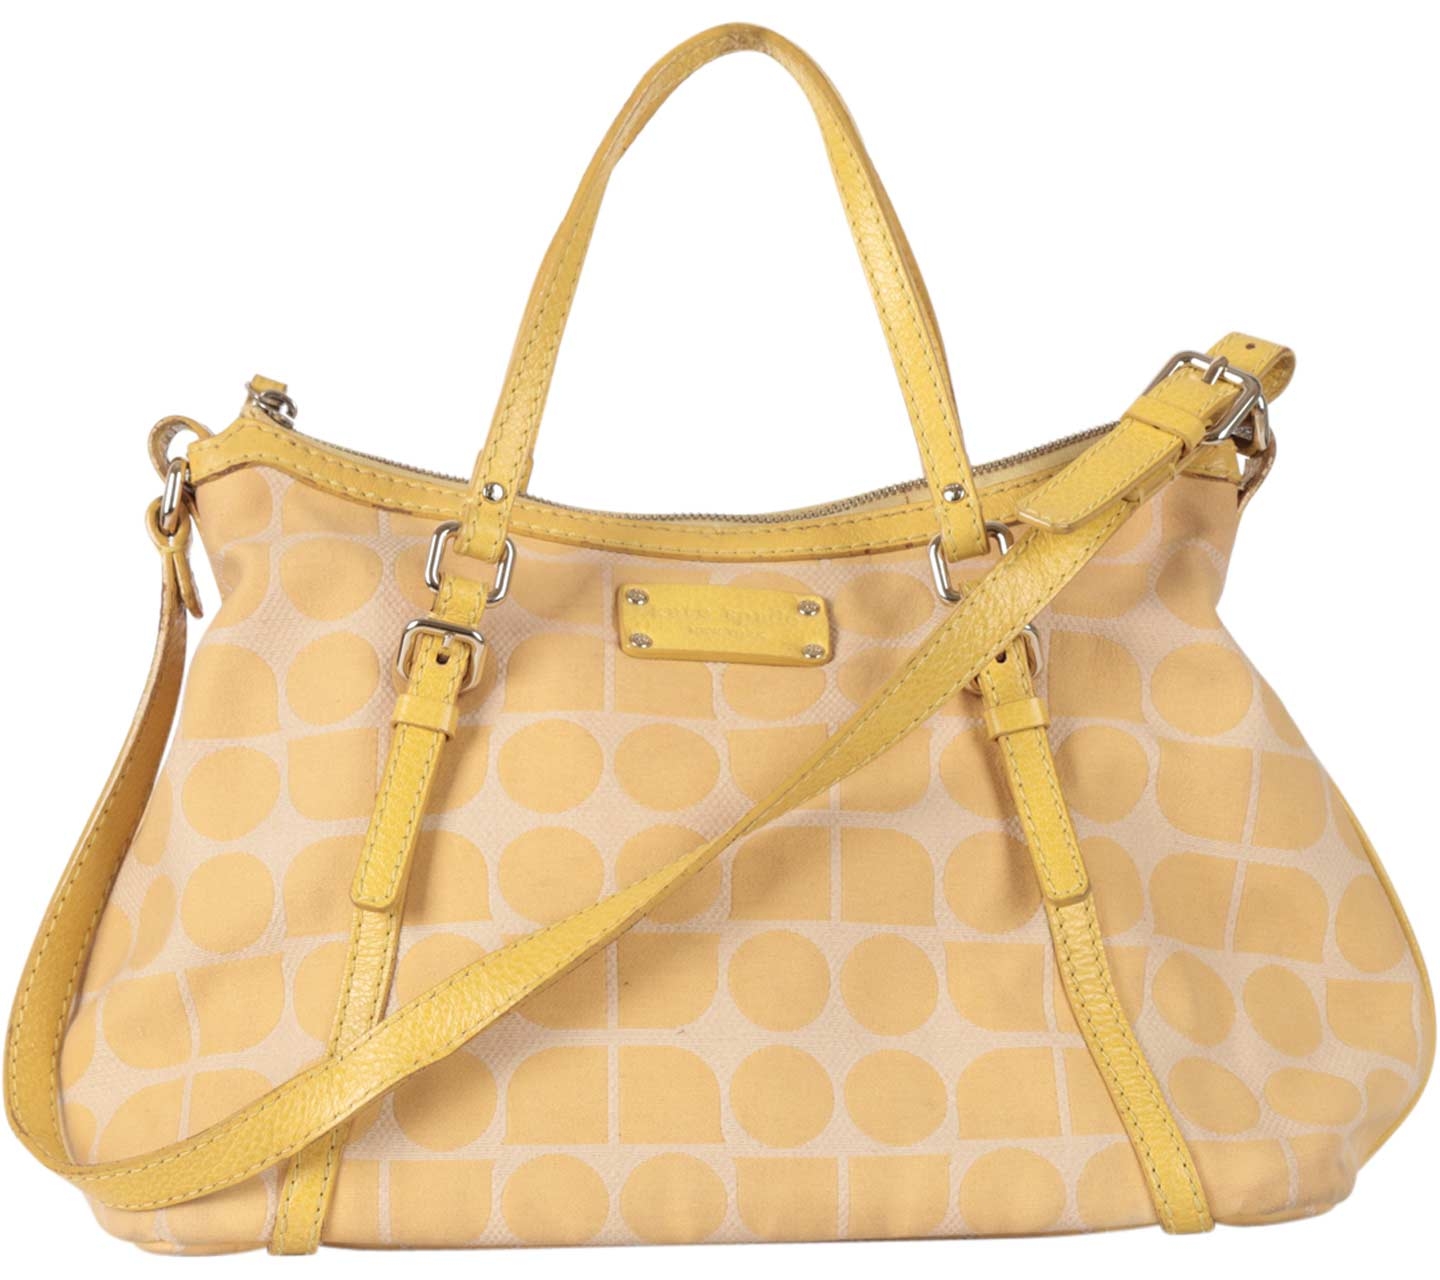 Kate Spade Yellow Patterned Satchel